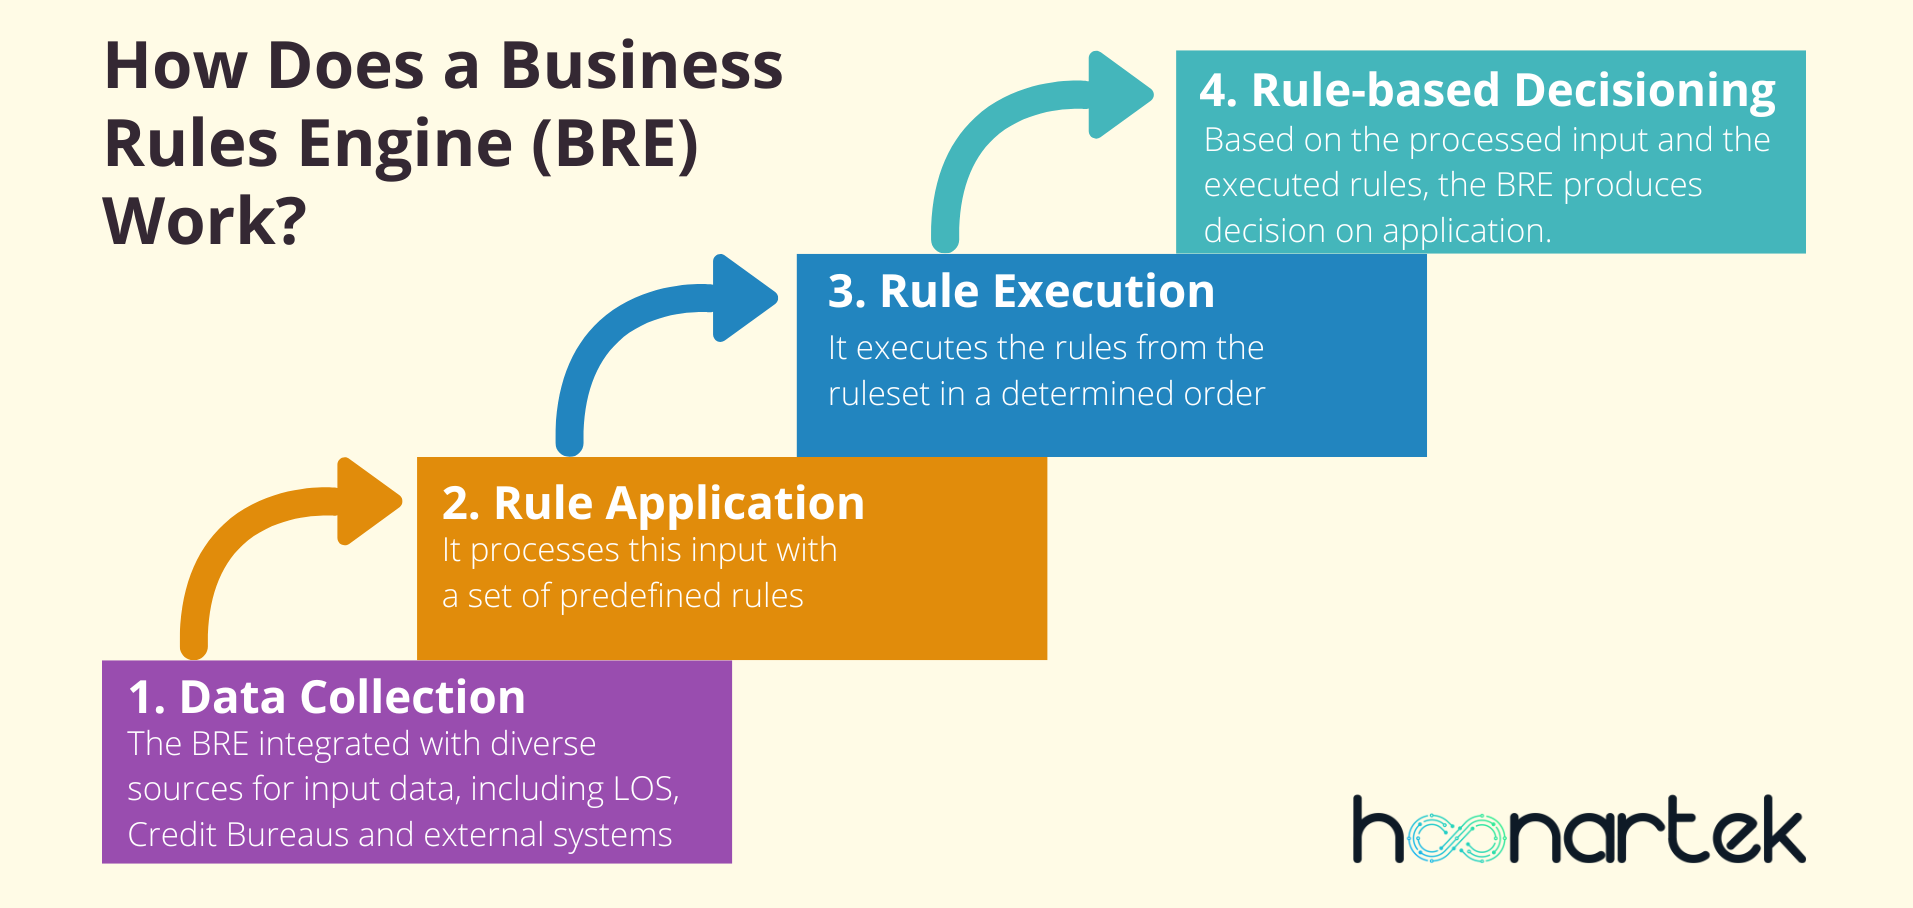 How Does a Business Rules Engine Work